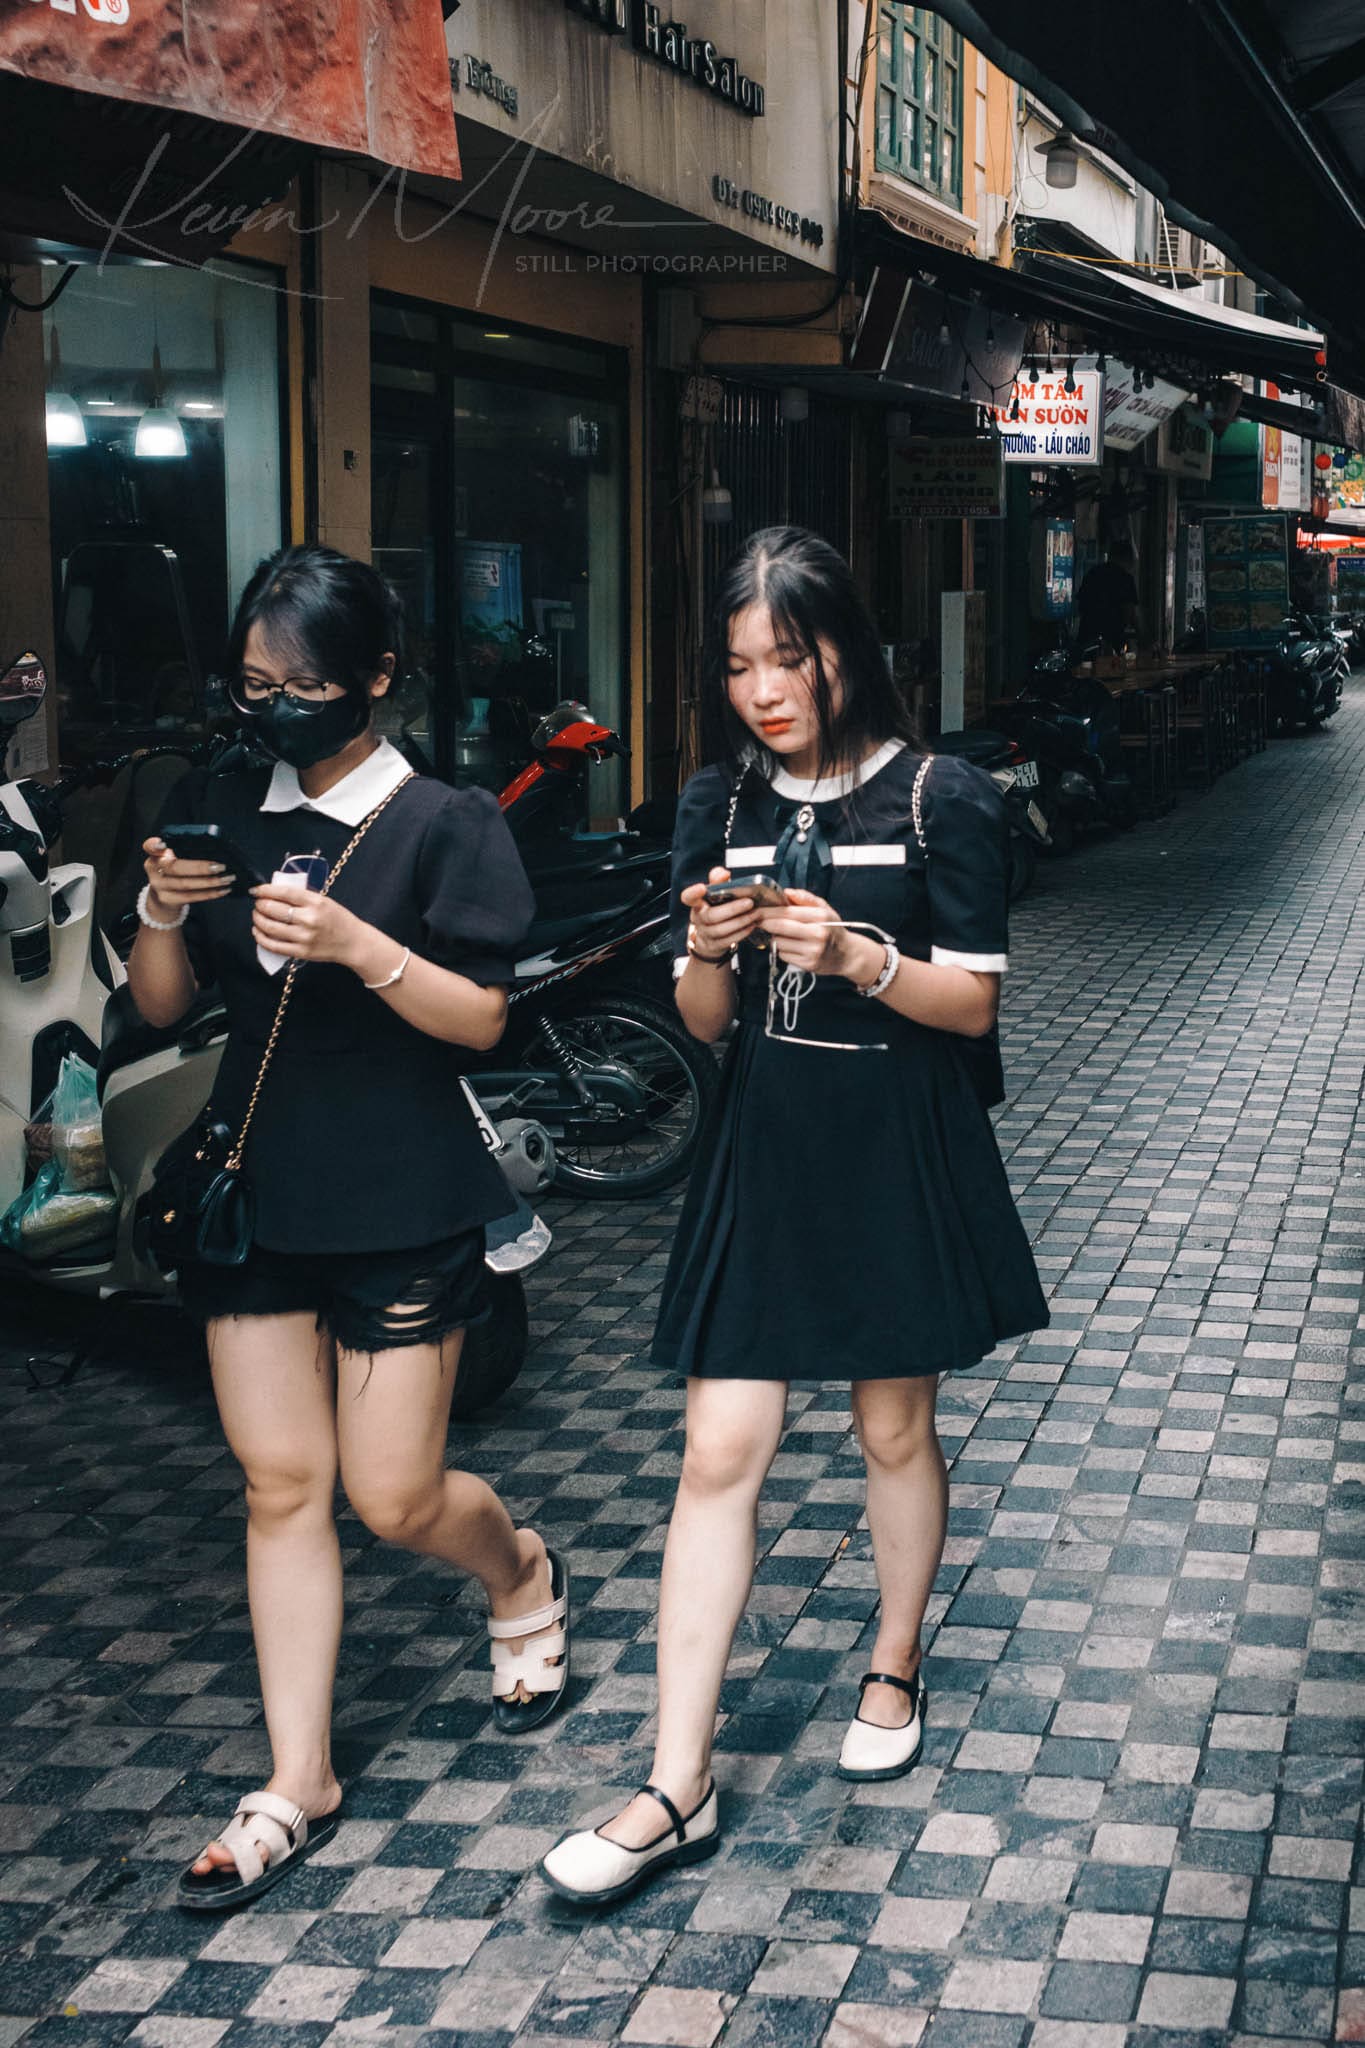 Two young Vietnamese women engrossed in smartphones on a tiled pedestrian street in Southeast Asia.